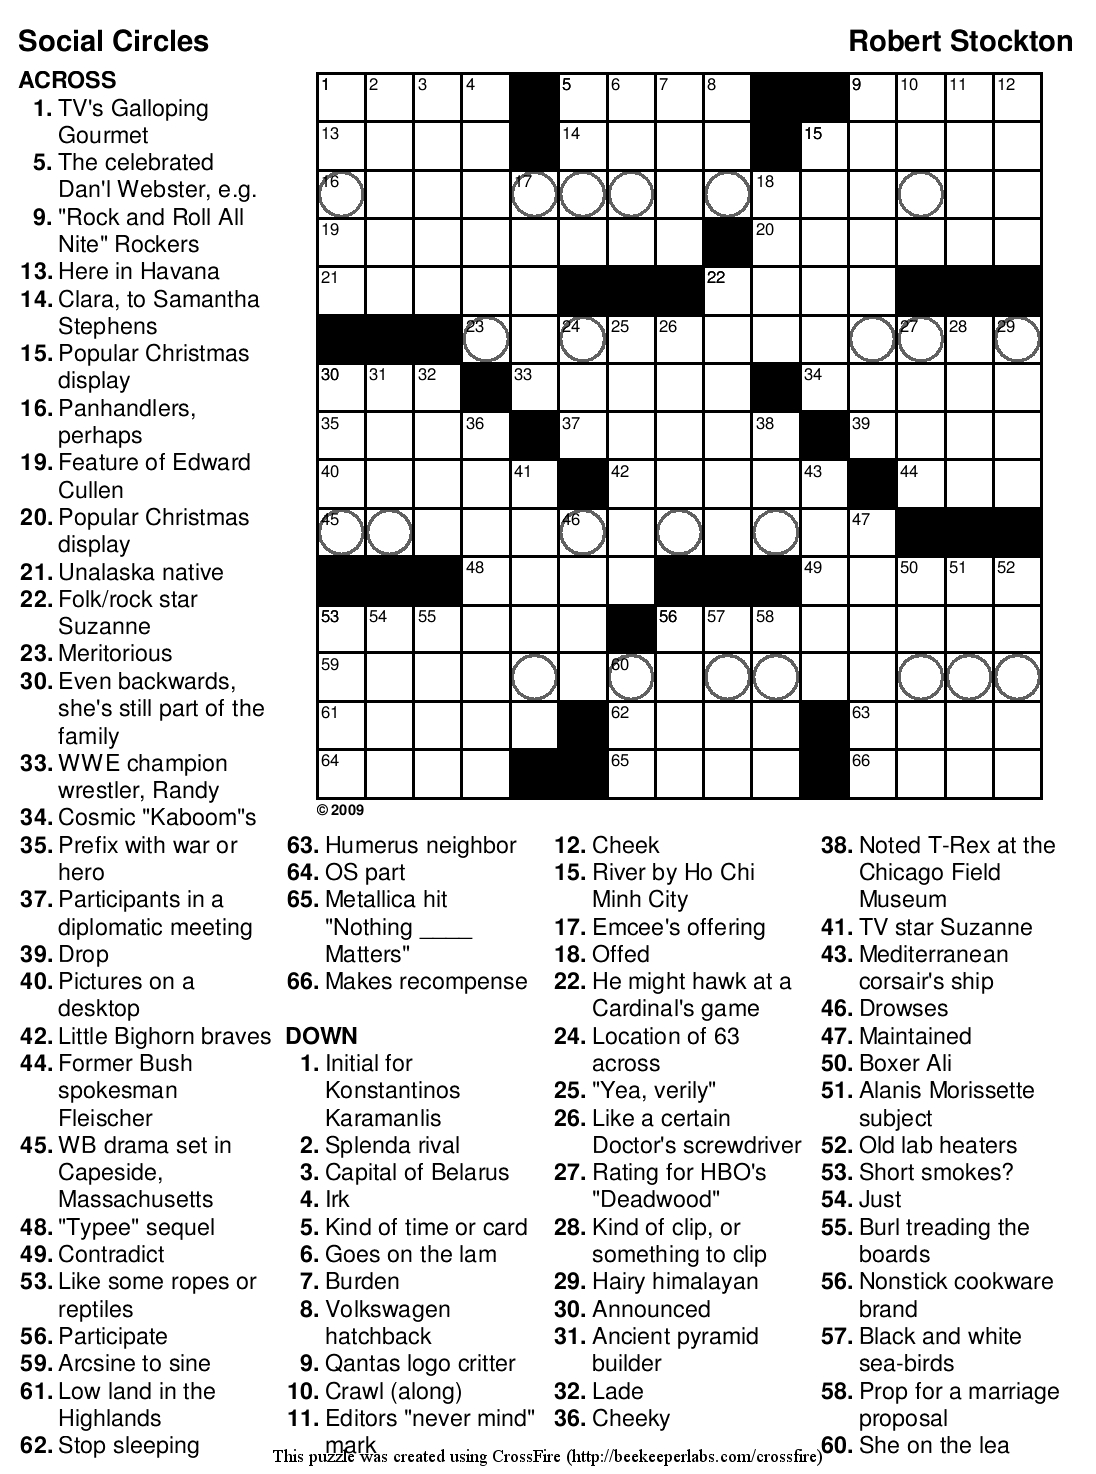 Crossword Puzzles Printable - Yahoo Image Search Results | Crossword - Print Free Crossword Puzzles Online